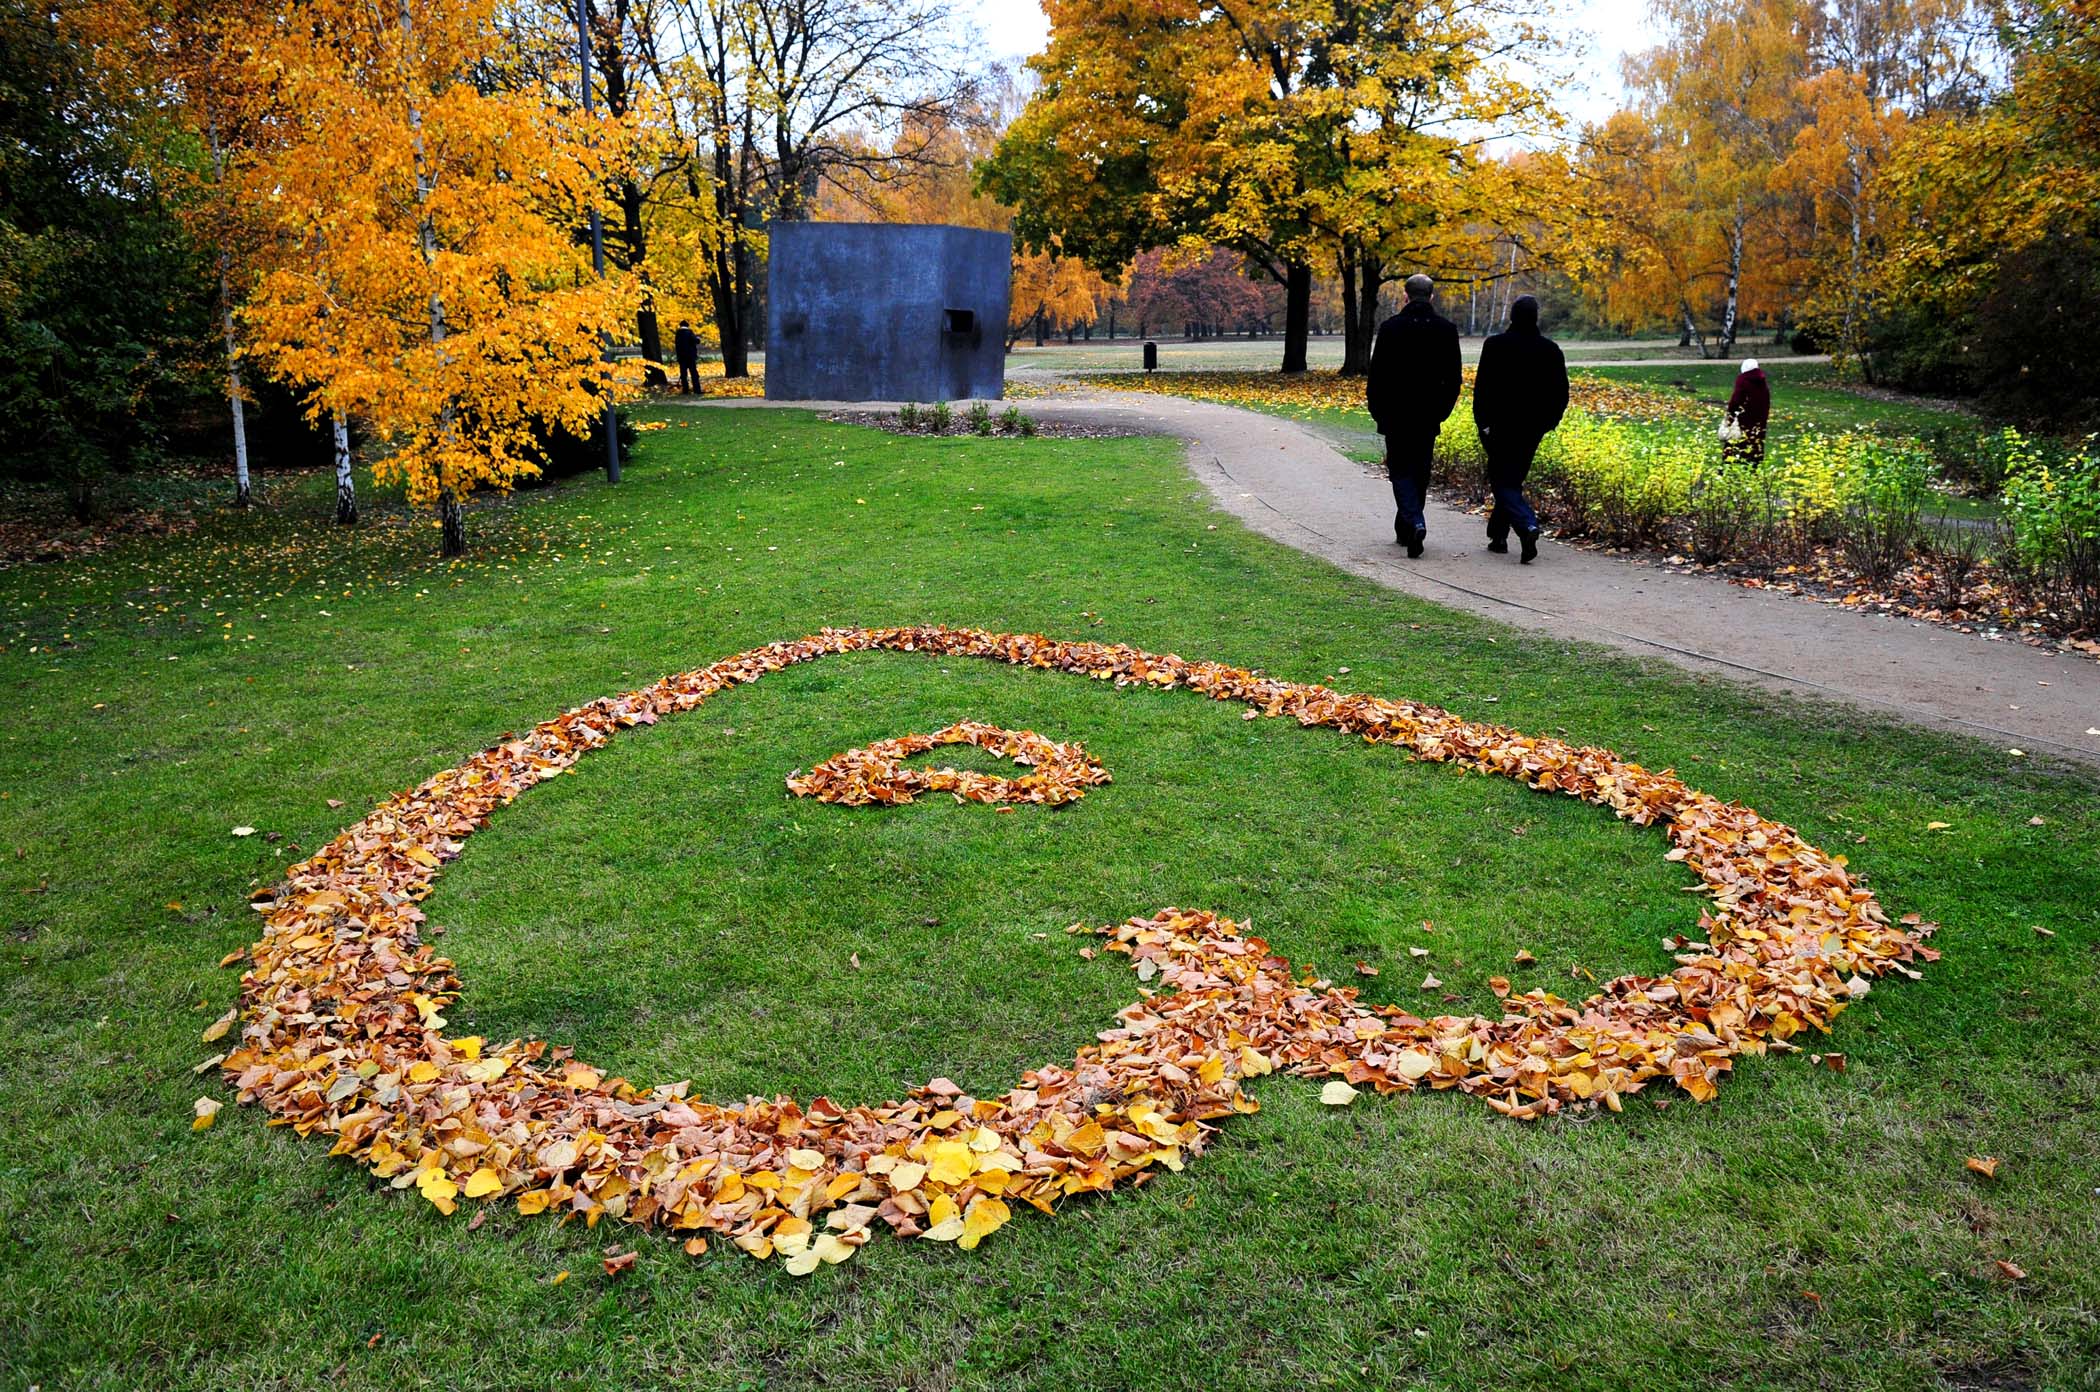 NOVEMBER 2: People walk past a heart made of autumnally colored leaves in Berlin's Tiergarten park. (Johannes Eisele/AFP/Getty Images)